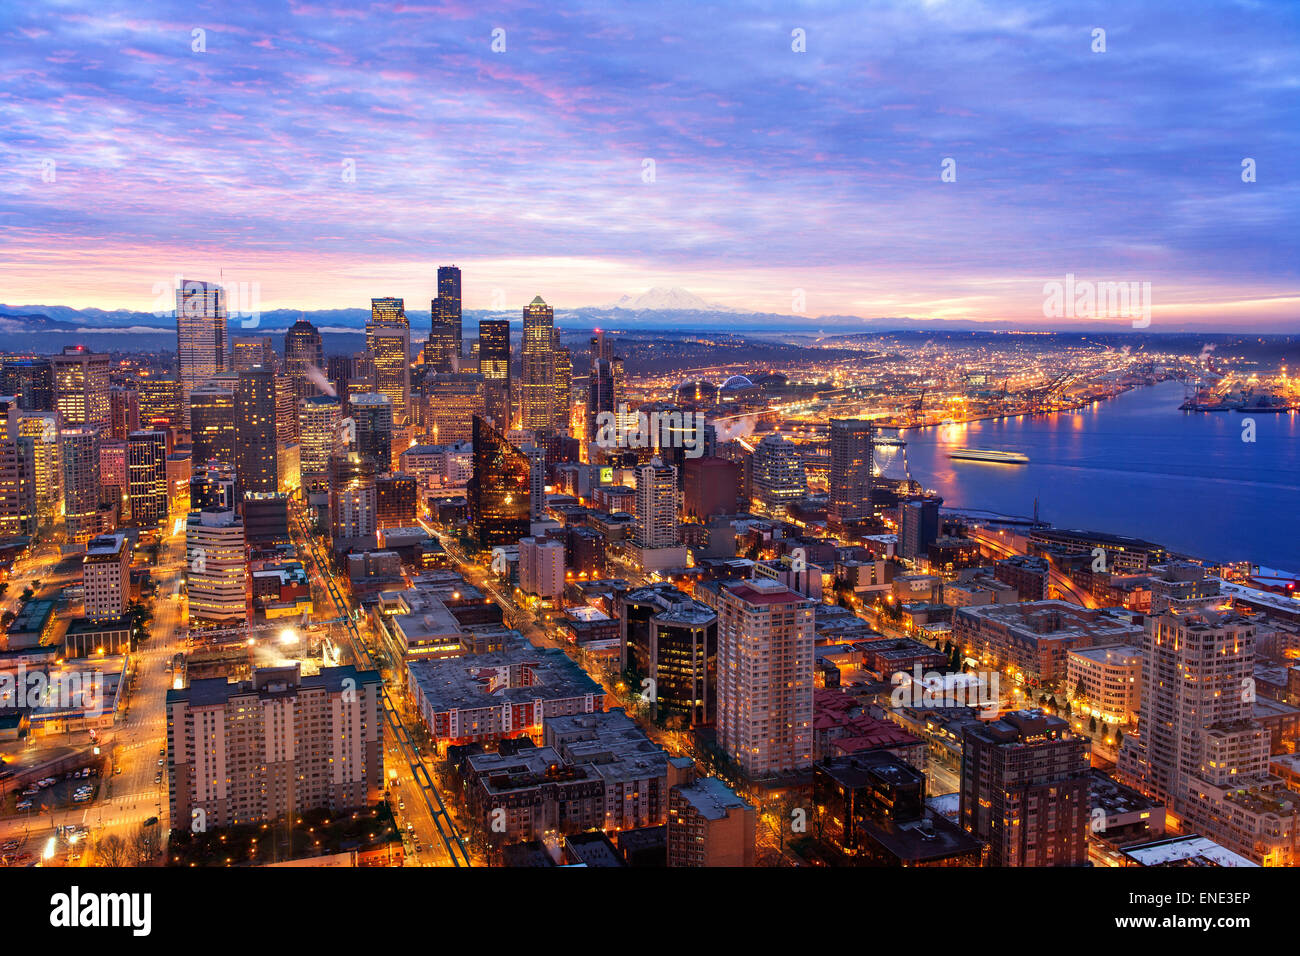 Seattle, Washington skyline at sunrise with clouds passing over the cityscape. Stock Photo